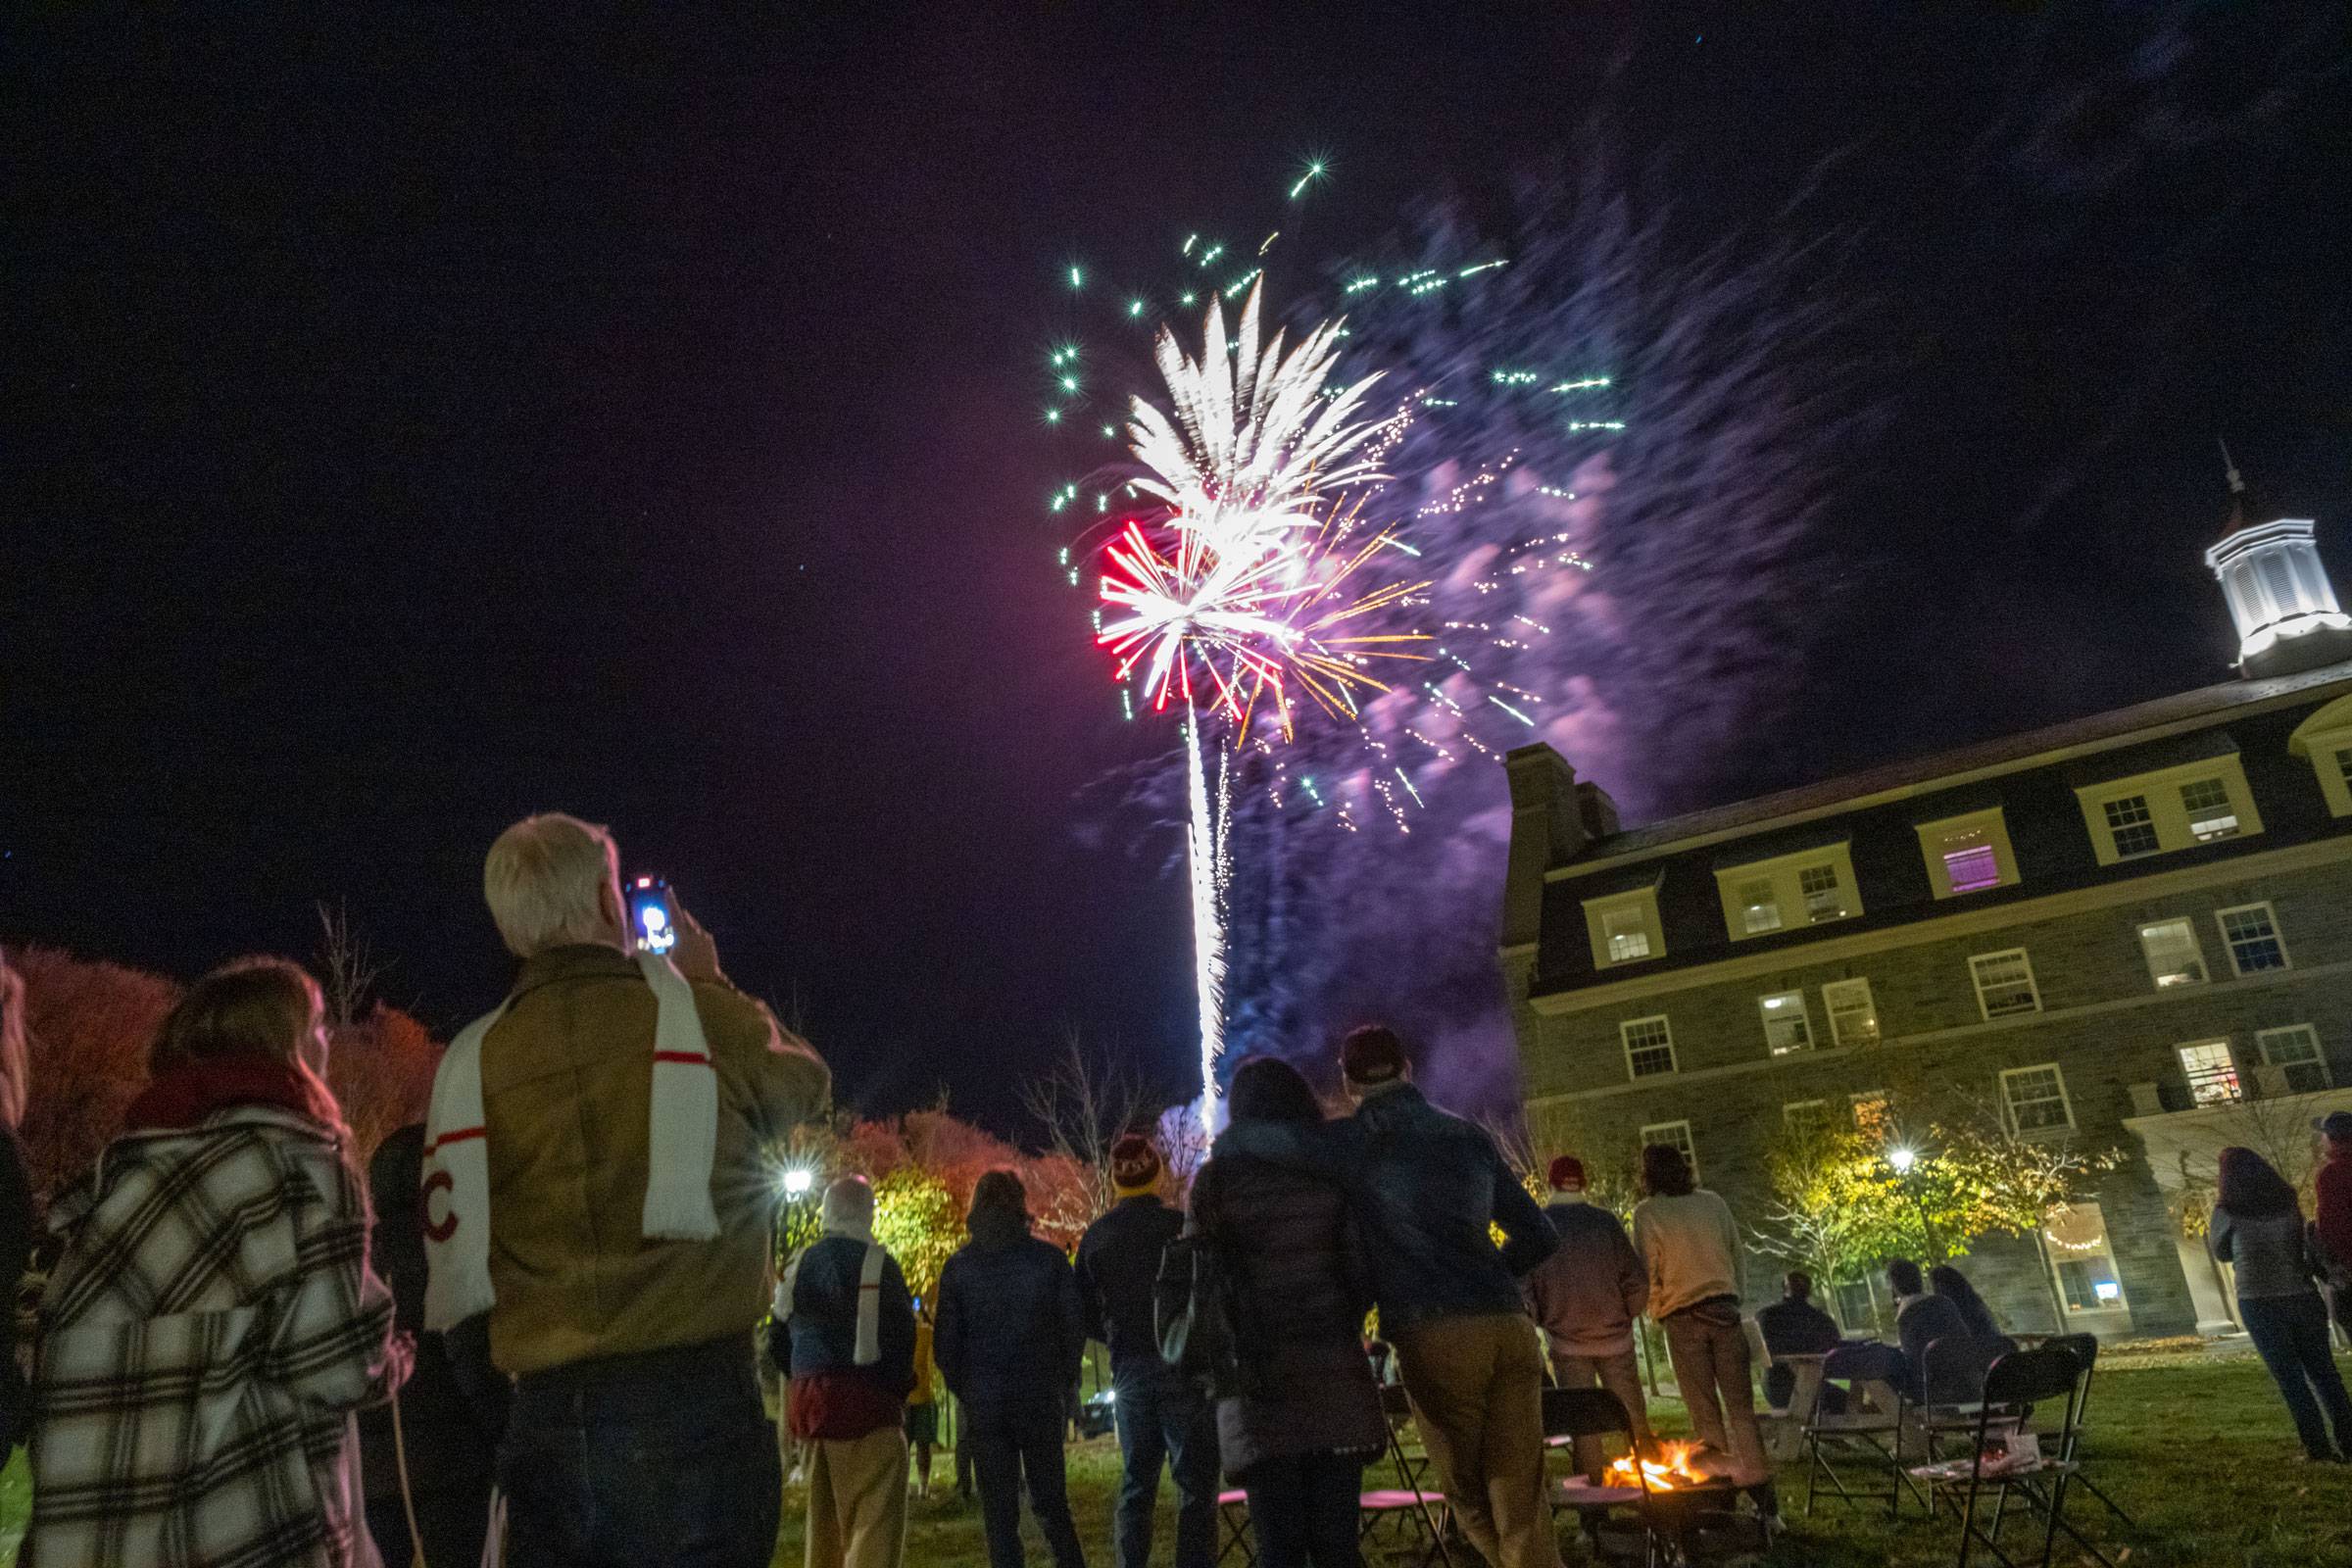 Family members watch fireworks on the Burke-Pinchin quad